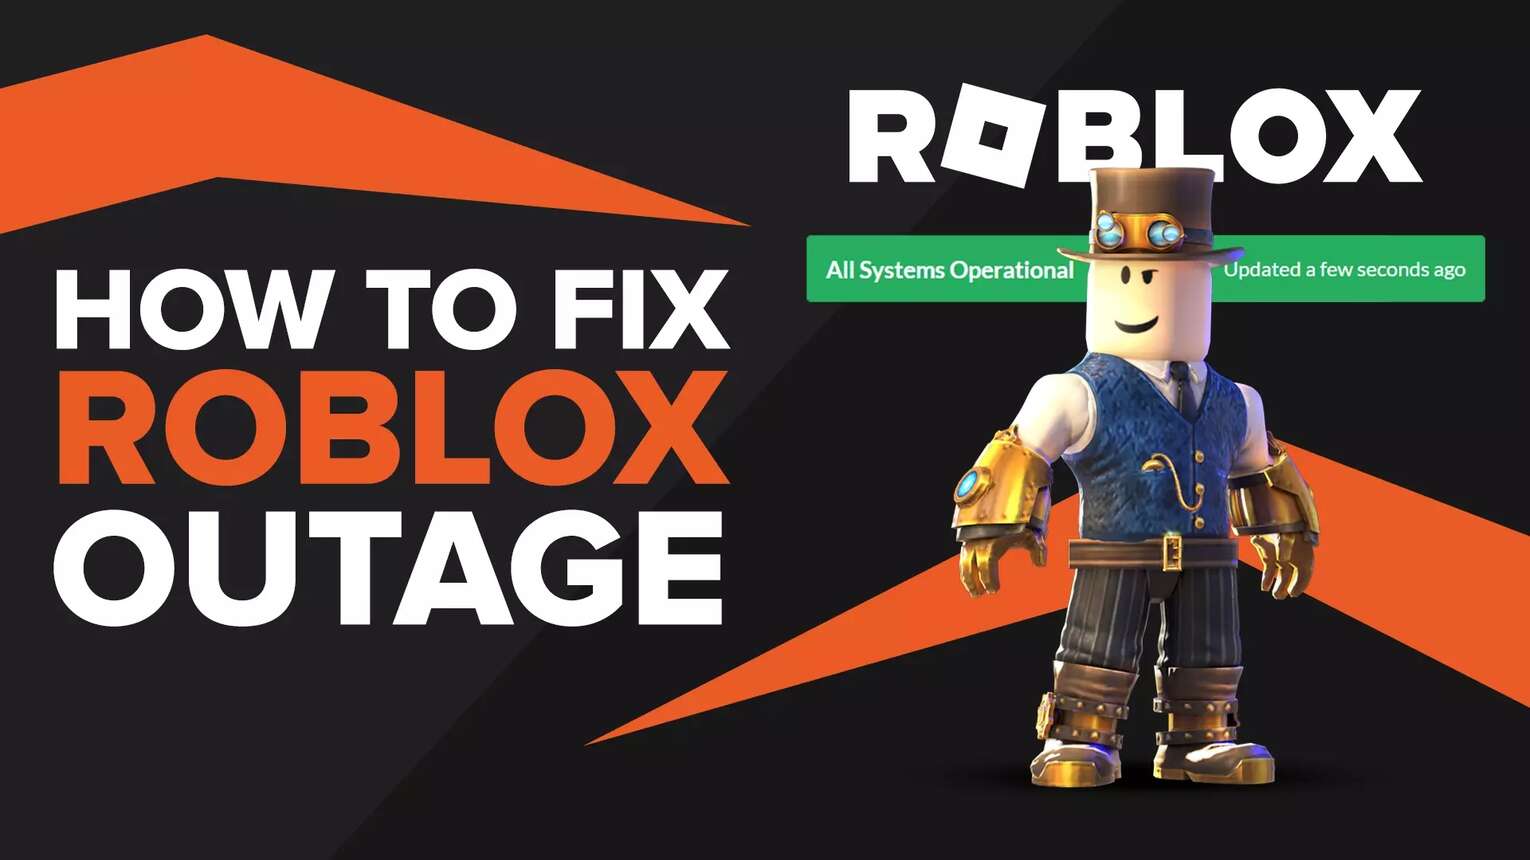 Roblox Not Loading - How to Fix? - Valibyte